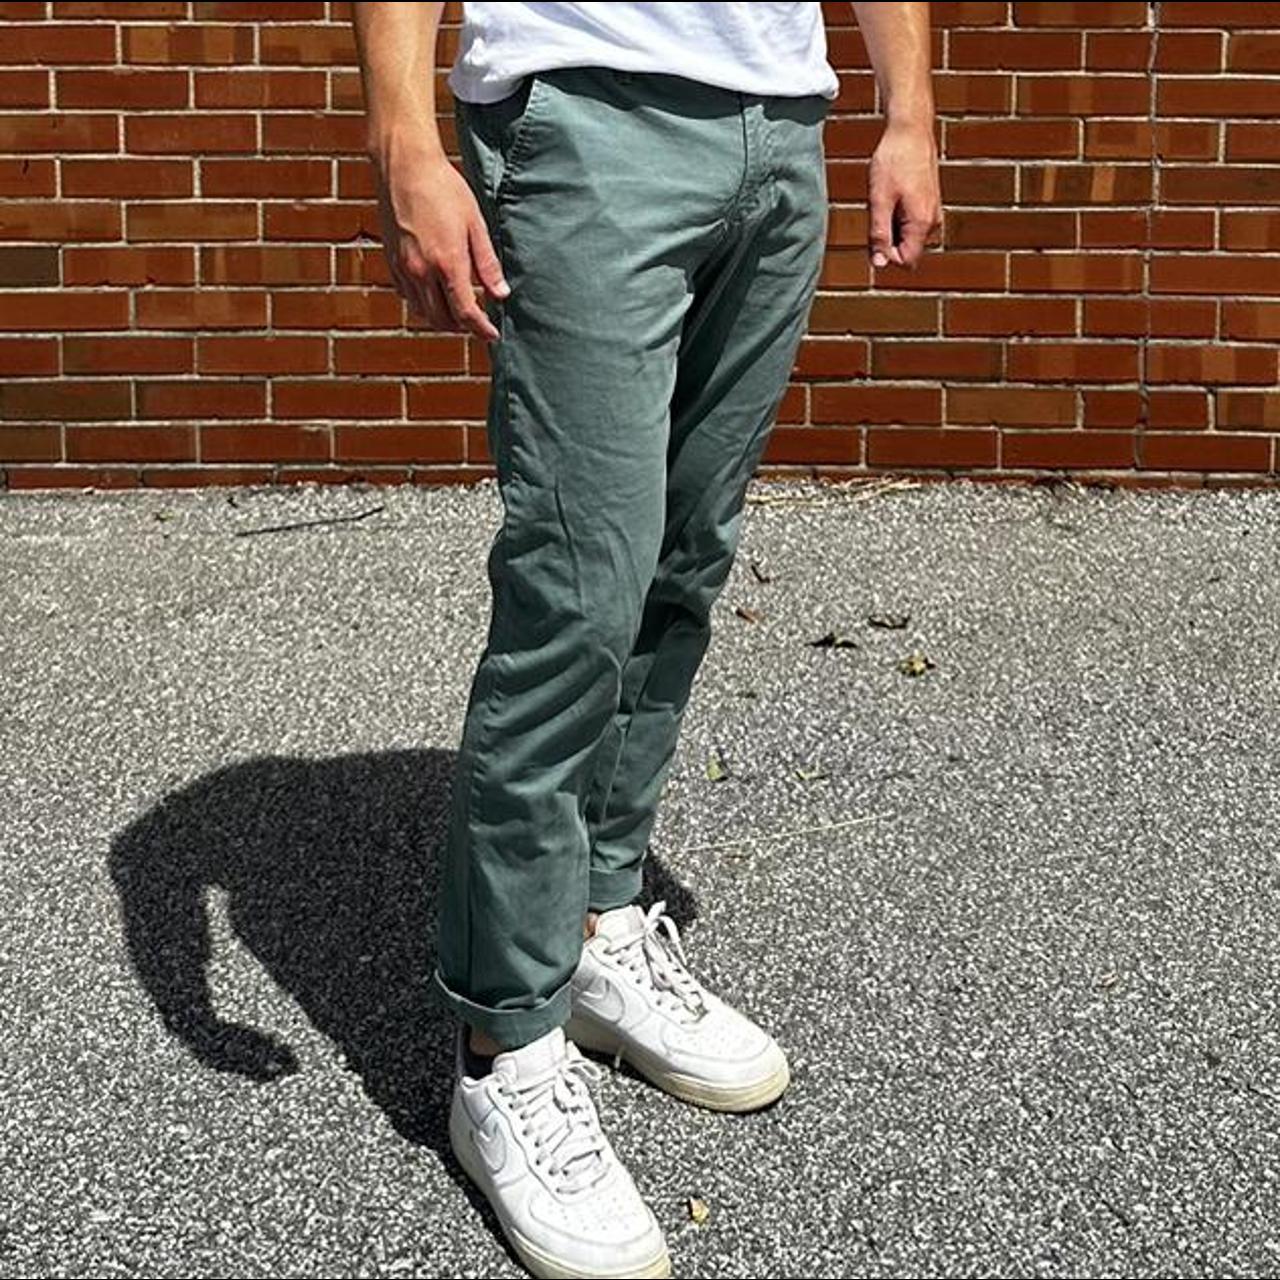 AEROPOSTALE Mens Slim Straight Color Casual Chino Pants, Green, 27W x 28L  at Amazon Men's Clothing store